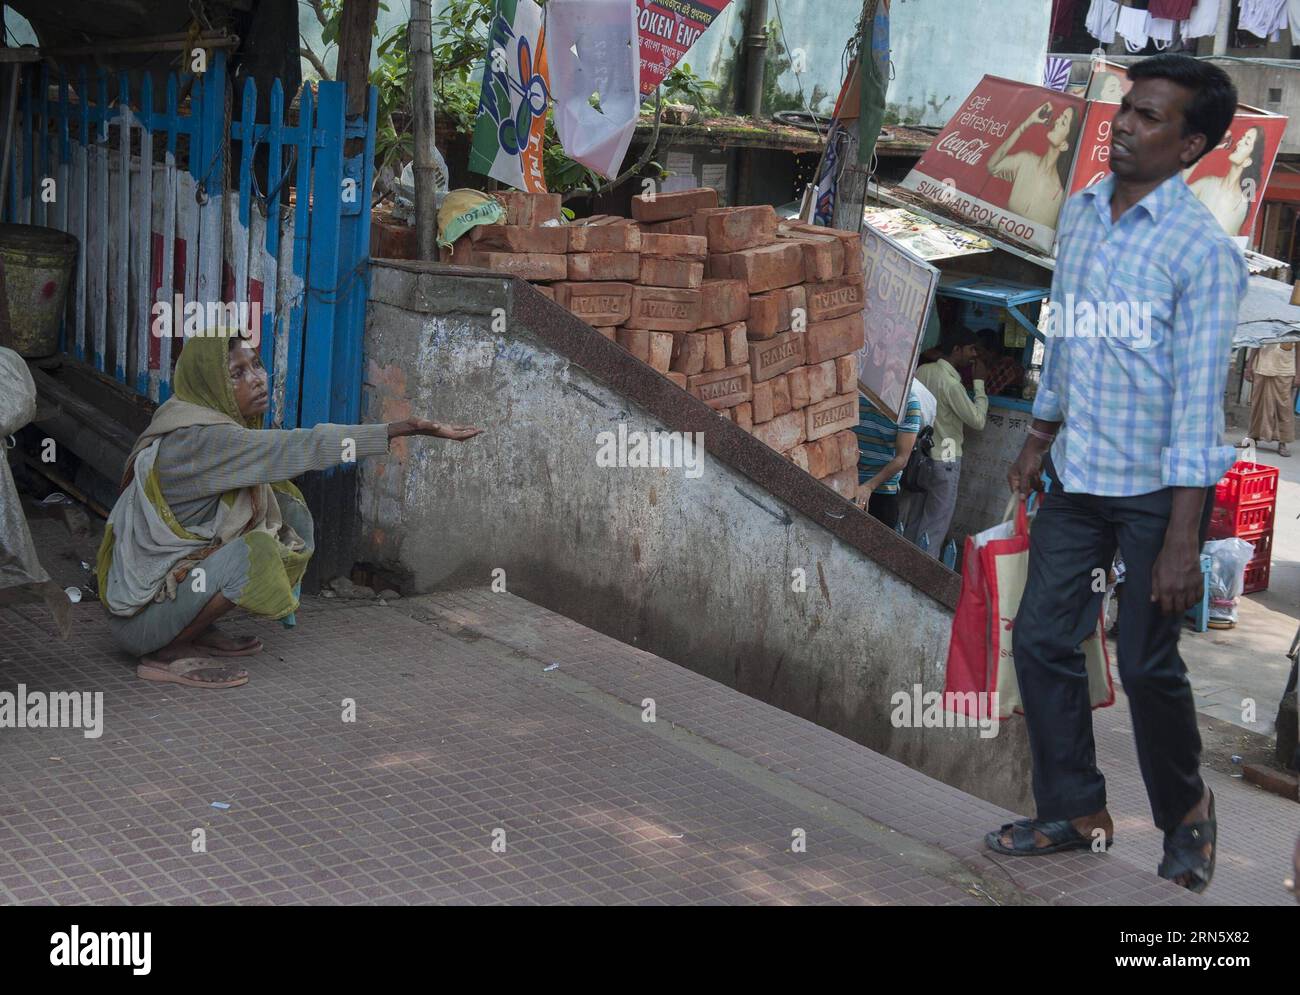 (150705) -- KOLKATA, July 5, 2015 -- An Indian village woman begs for money in Kolkata, capital of eastern Indian state West Bengal, July 4, 2015. India has released new socio-economic and caste census data which covers the period between 2011 and 2013 to show the wealth, living conditions and other details of the country s 1.2 billion people. Nearly one third are landless, and half derive their income mainly from manual labor. ) Authorized by ytfs (WORLD SECTION) INDIA-KOLKATA-CENSUS DATA-POVERTY TumpaxMondal PUBLICATIONxNOTxINxCHN   Kolkata July 5 2015 to Indian Village Woman Begs for Money Stock Photo